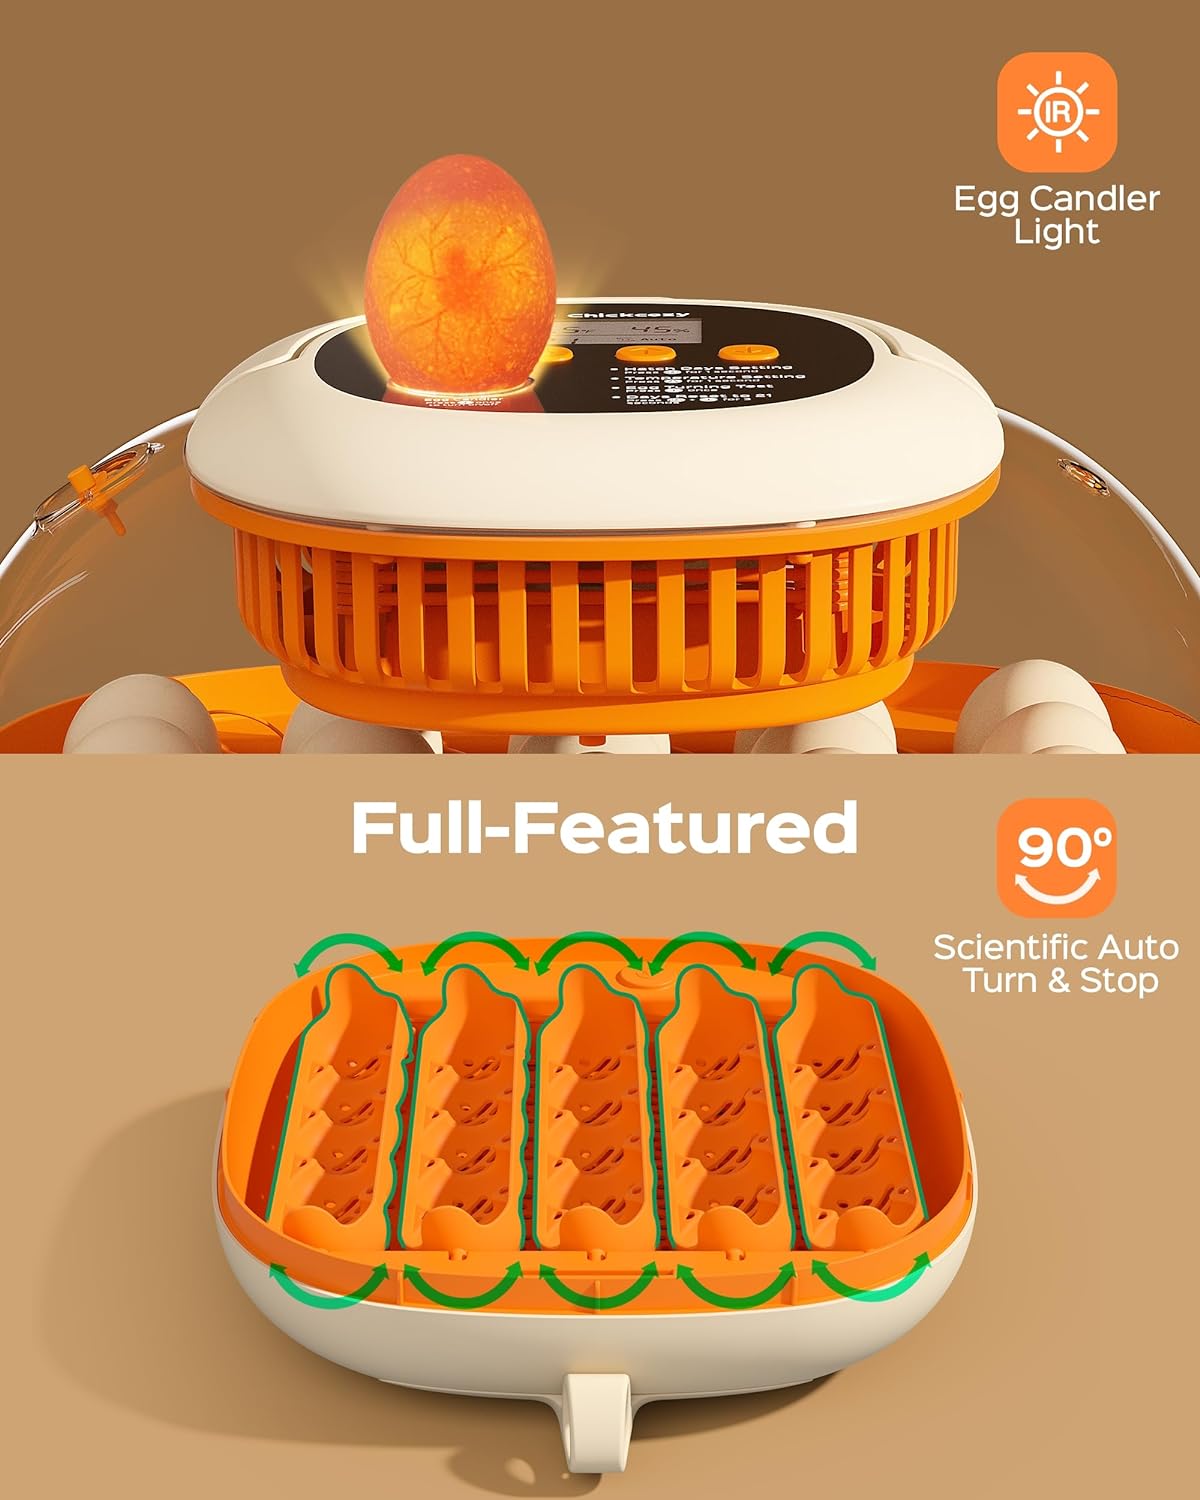 25 Egg Incubator for Hatching Chicks, Automatic Egg Turner with Thermometer Seat and Humidity Control, Egg Candler